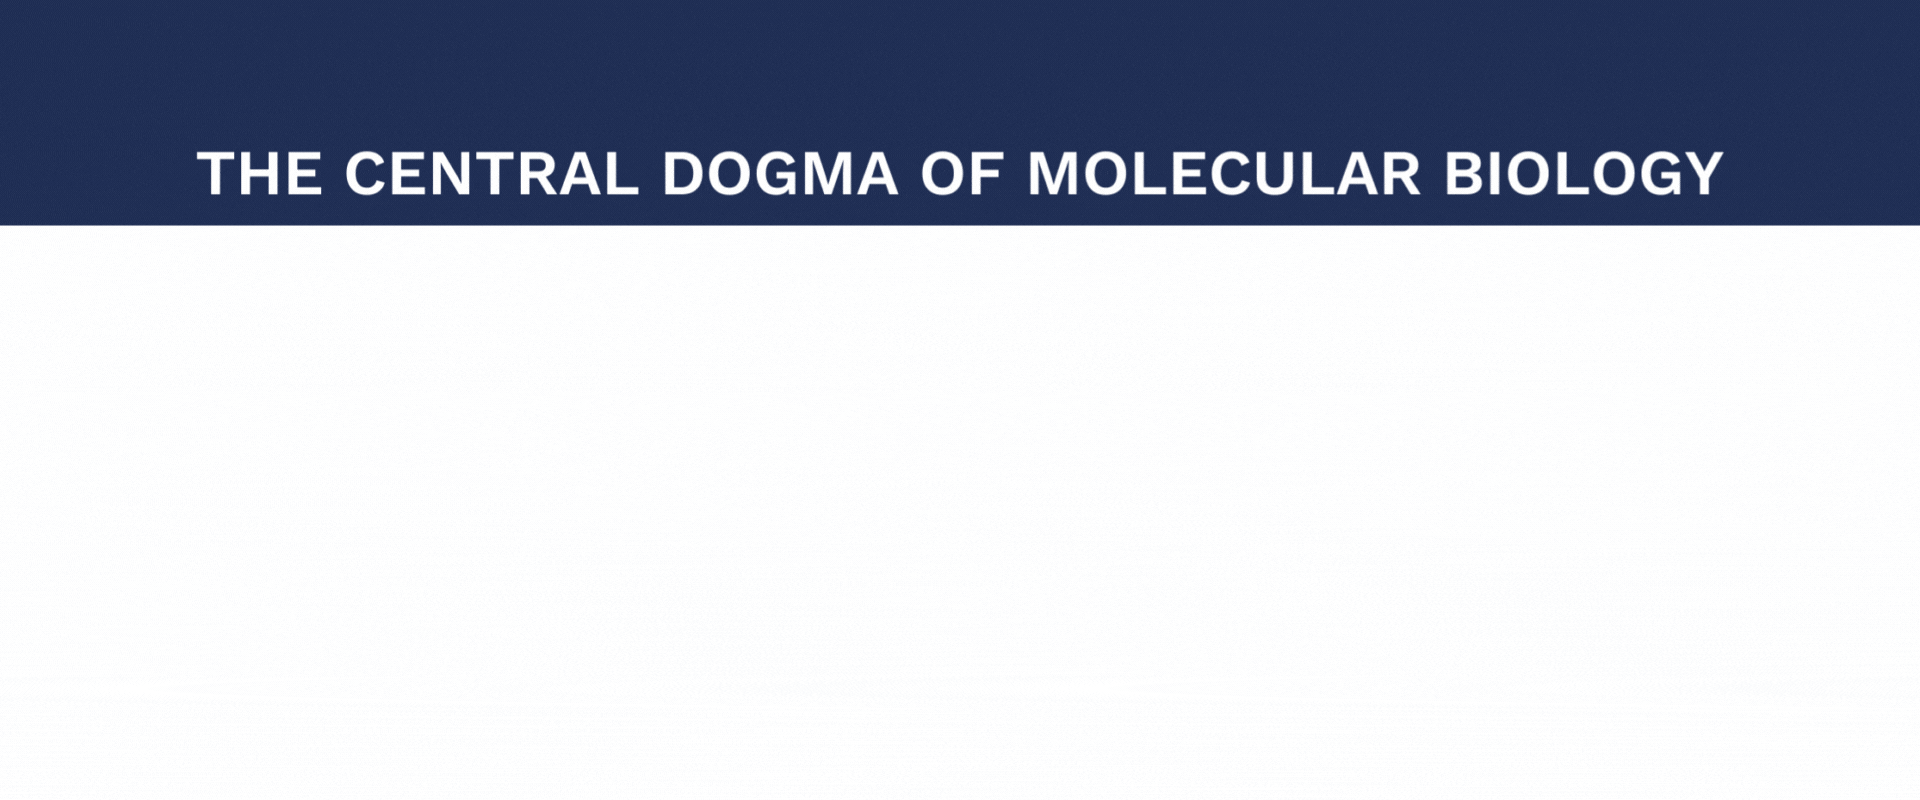 [UPDATED] THE CENTRAL DOGMA OF MOLECULAR BIOLOGY